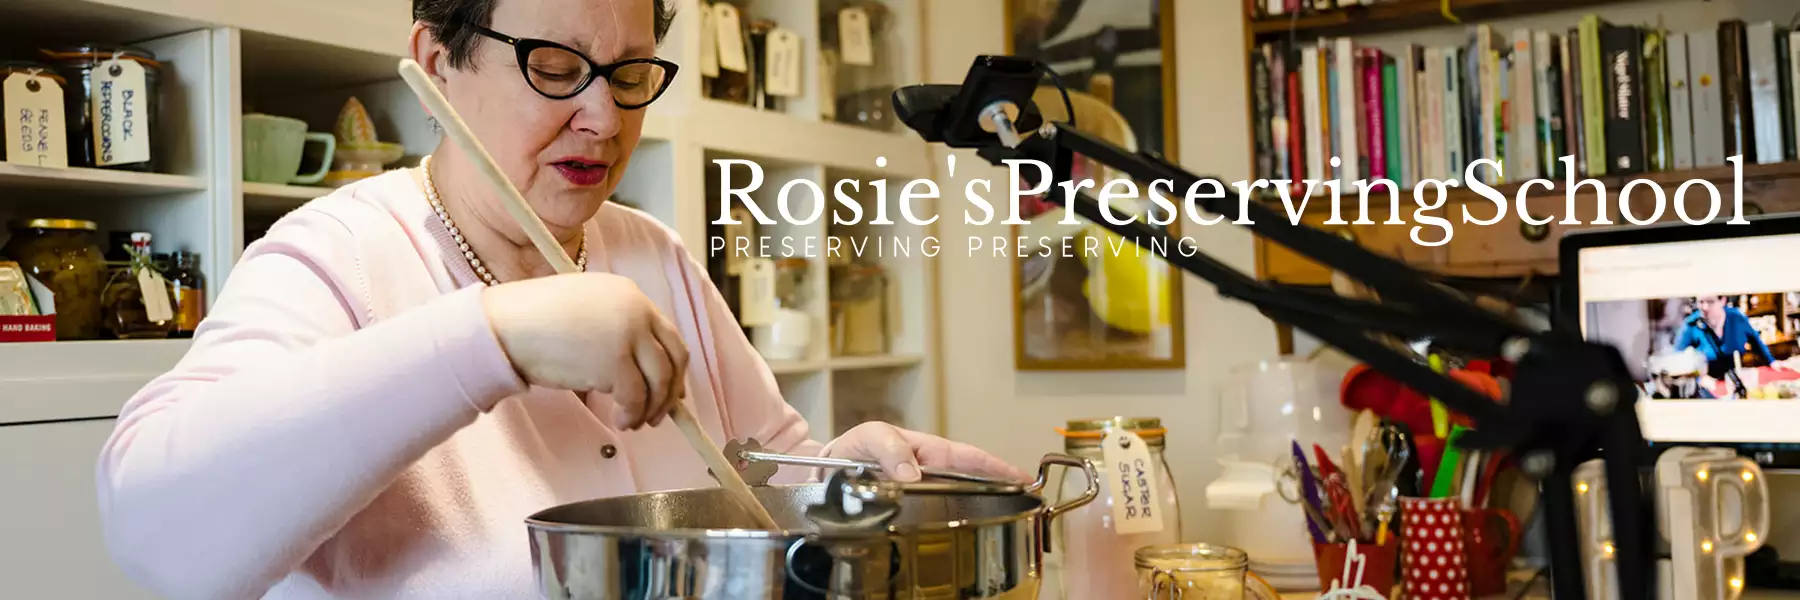 Come and explore Rosie's seasonal online preserving workshops, if you are interested in food preservation. Find out more here.